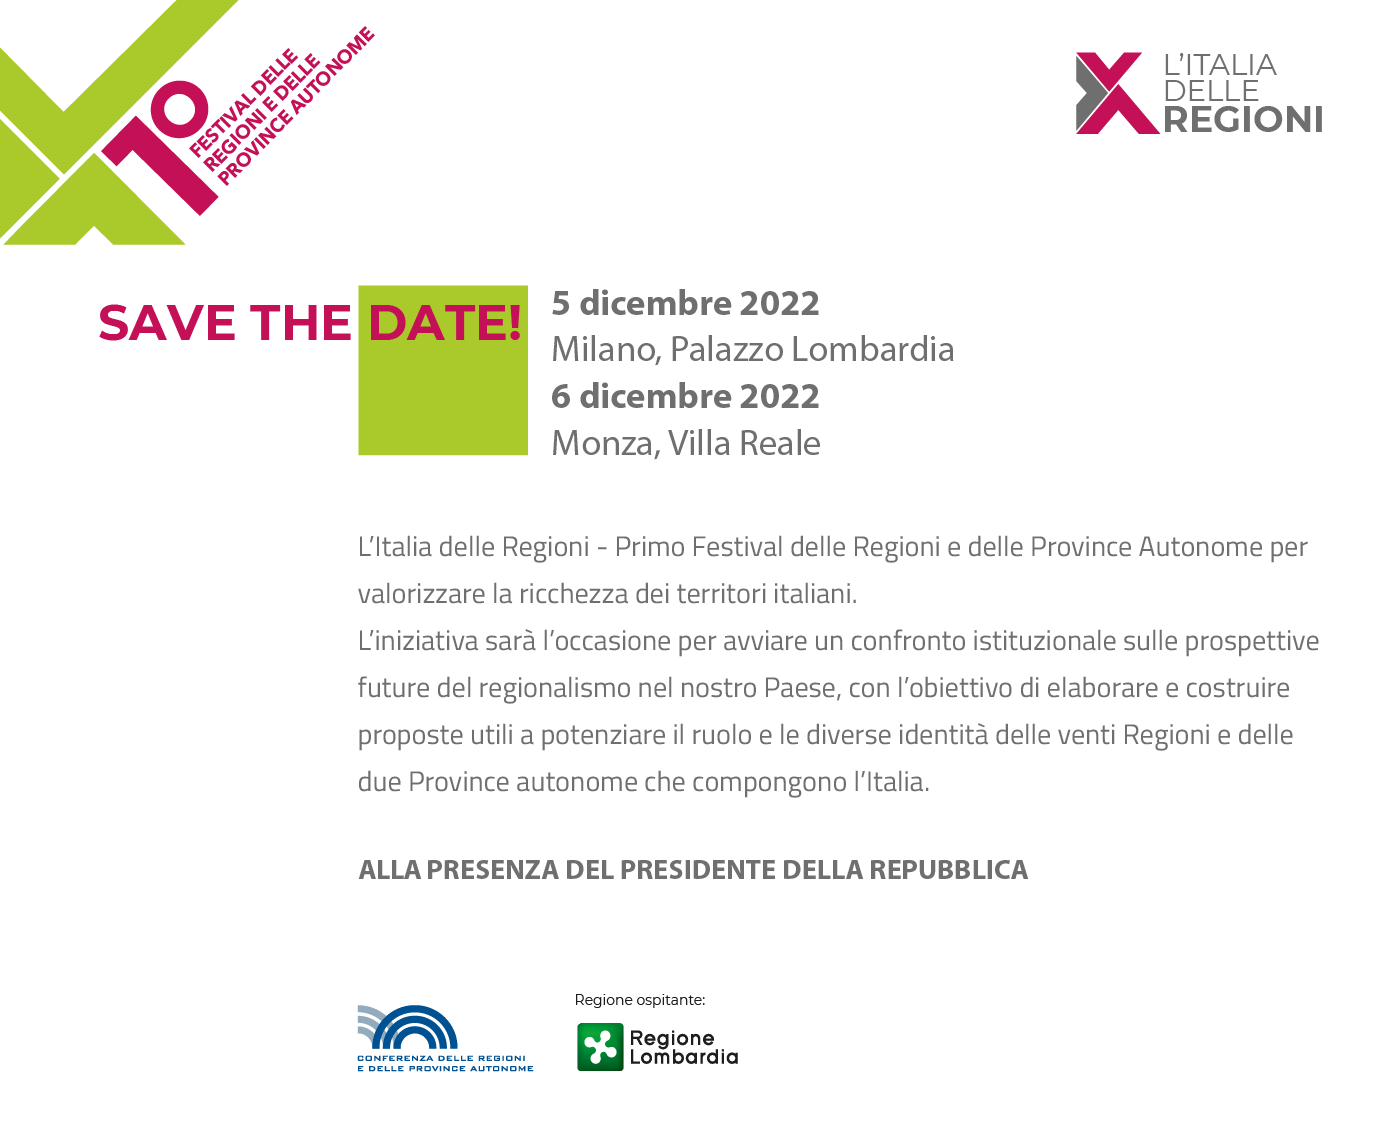 file/ELEMENTO_NEWSLETTER/24933/Save-the-date_UFFICIALE_festival_regioni_5_6_12_22_NL.png